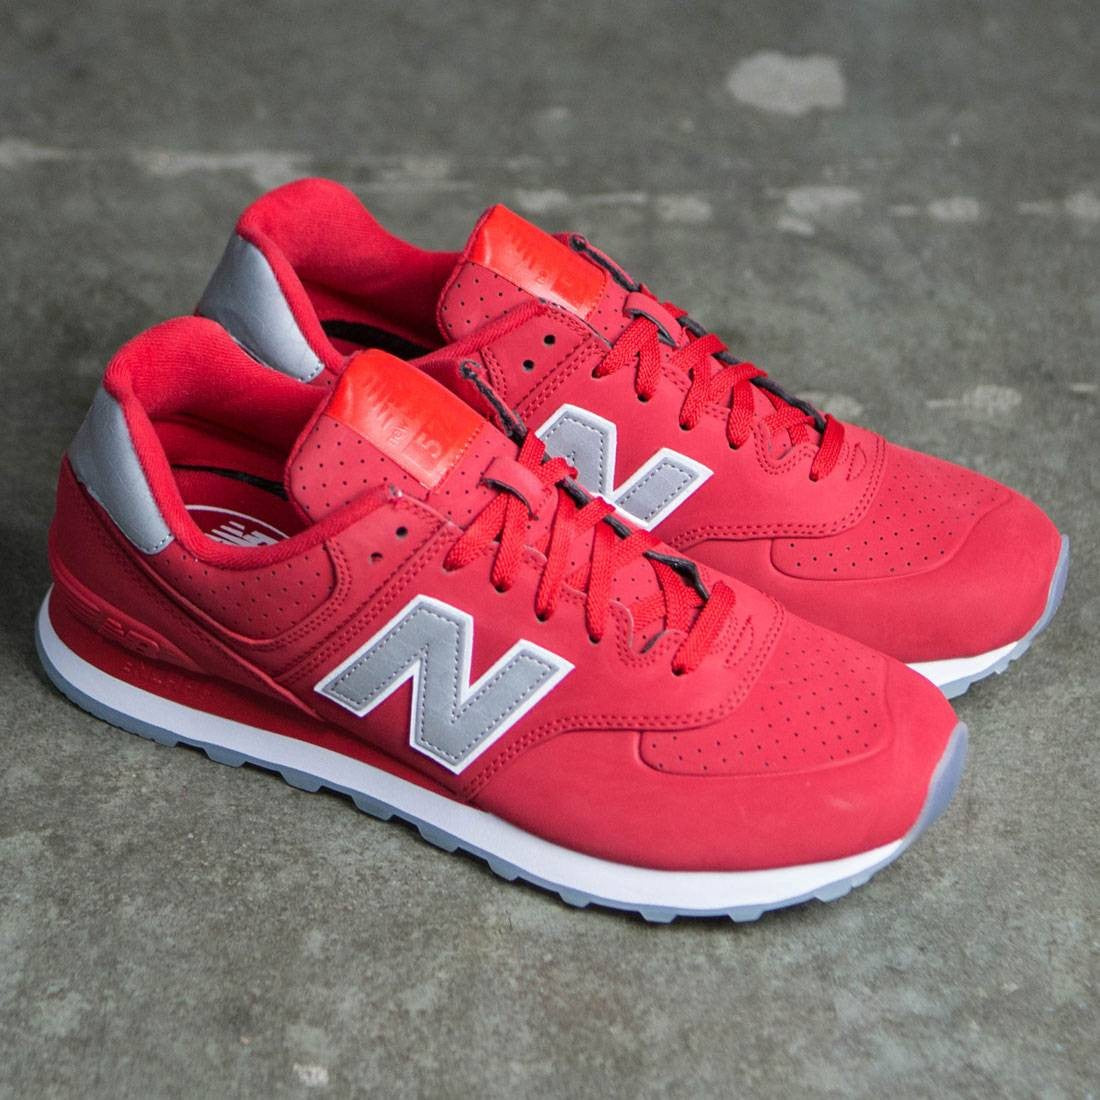 New Balance Numeric 574 Synthetic Red